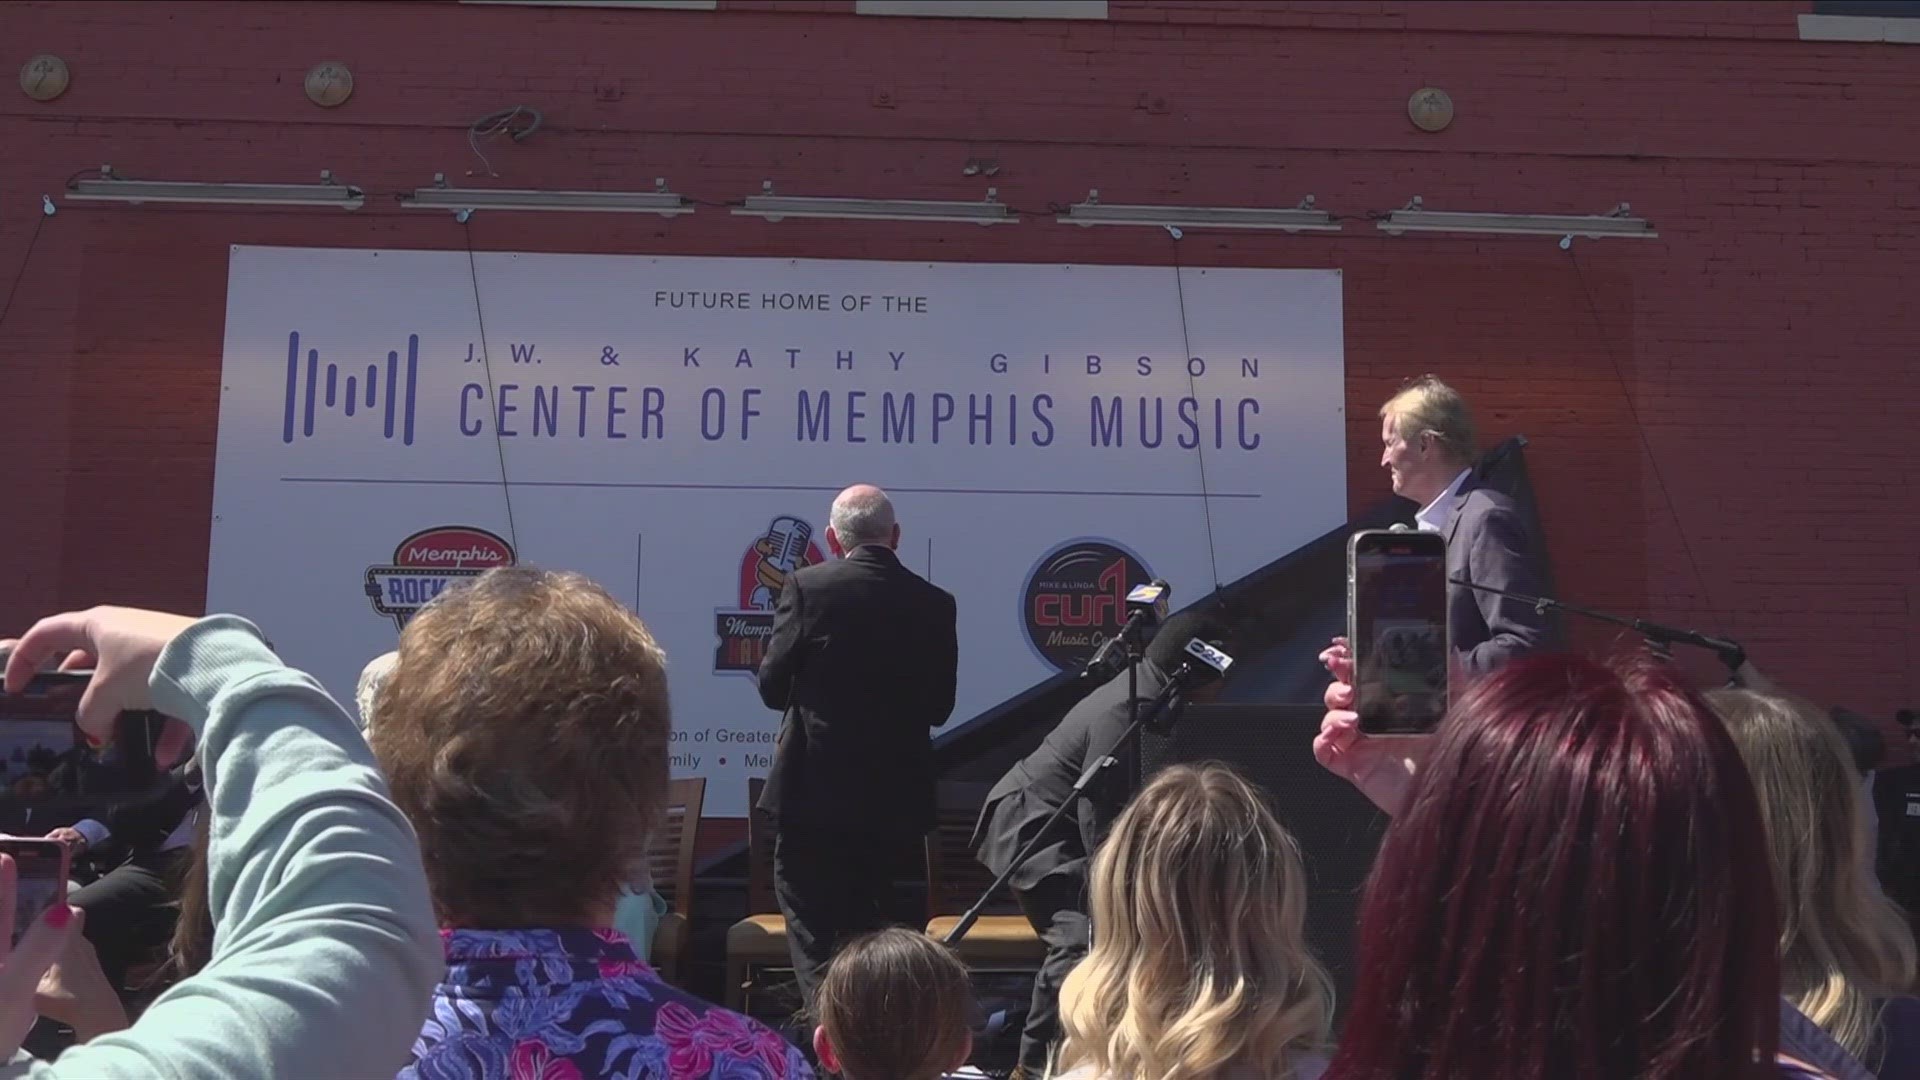 Memphians and celebrities alike, including Priscilla Presley, hope the project will help revitalize this historic street.